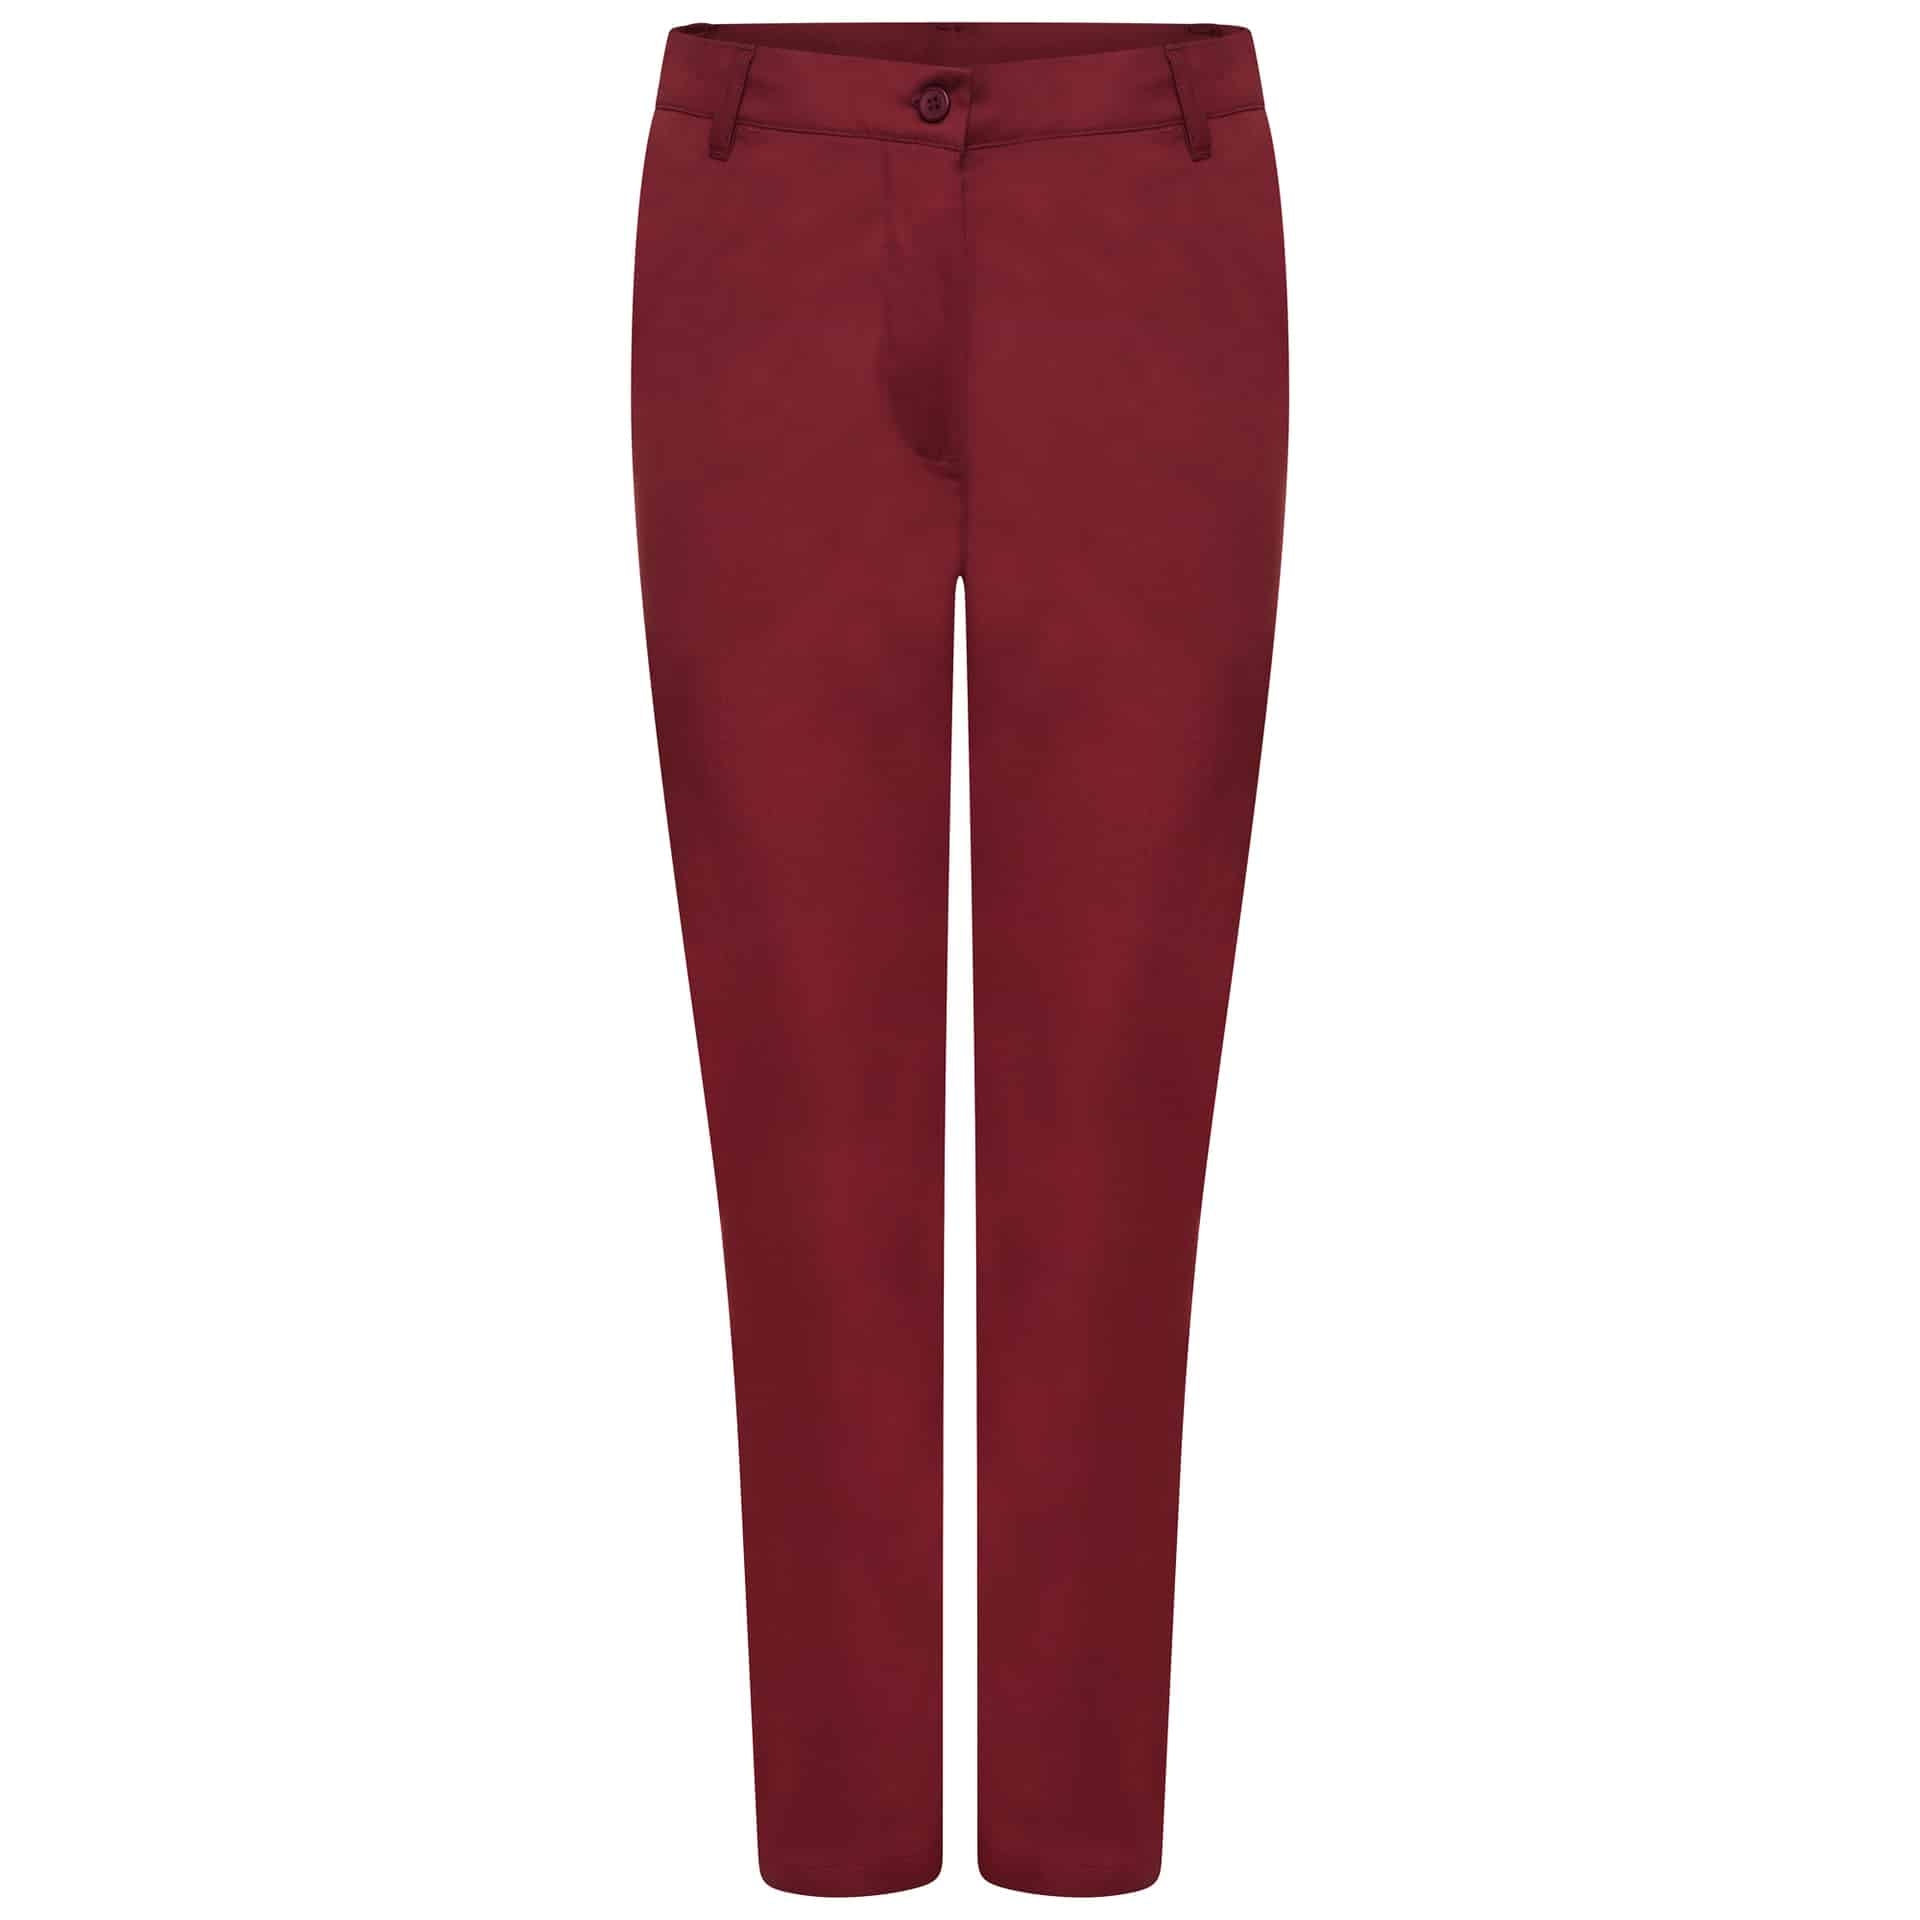 Behrens Ladies Stock Trousers – Maroon – 18 Extra Tall – Uniforms Online